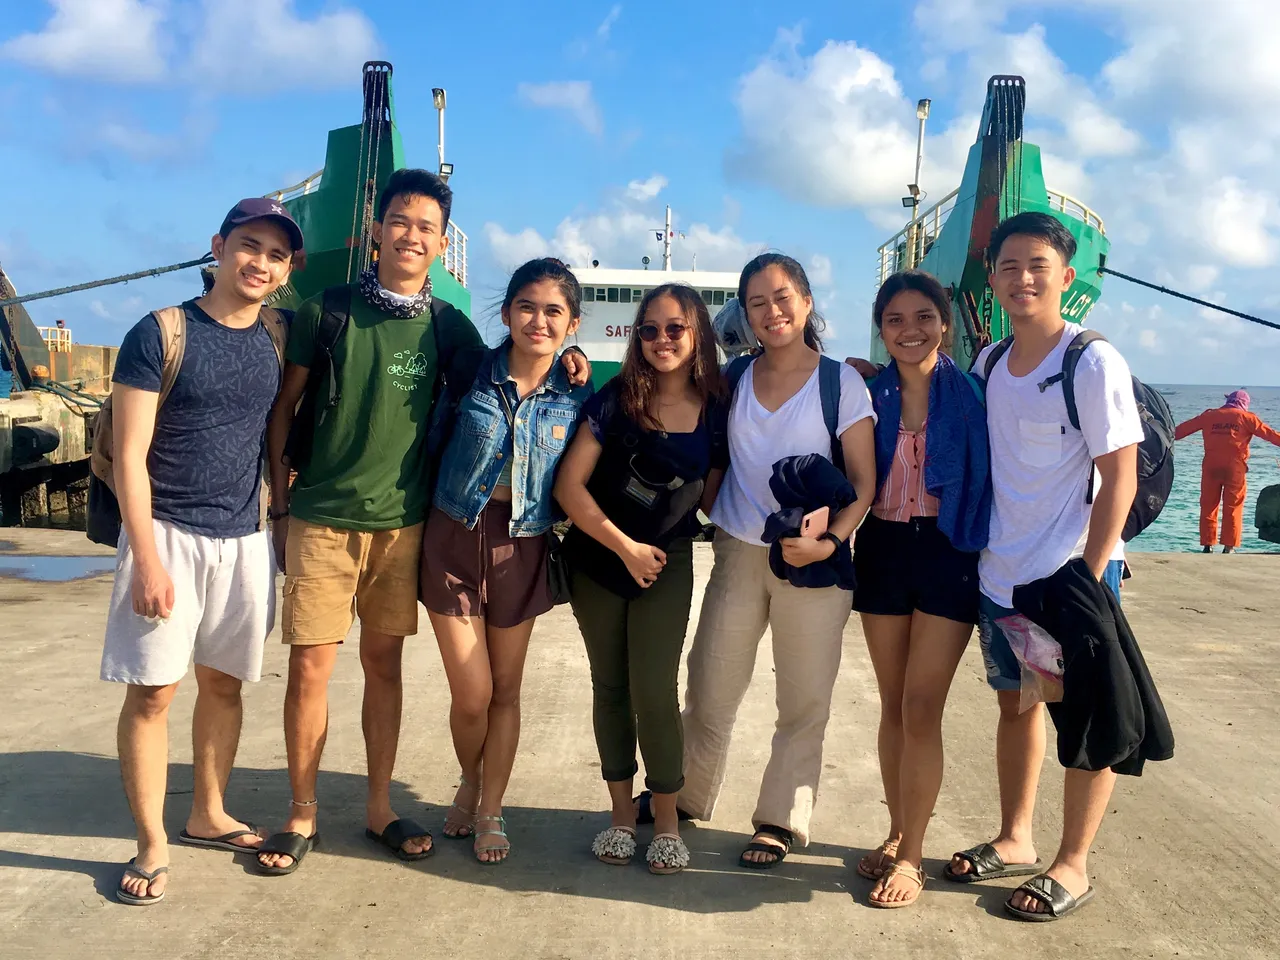 At Santa Fe Port: Touchdown Bantayan Island with the Barkada. Everyone is more than excited to start the adventure